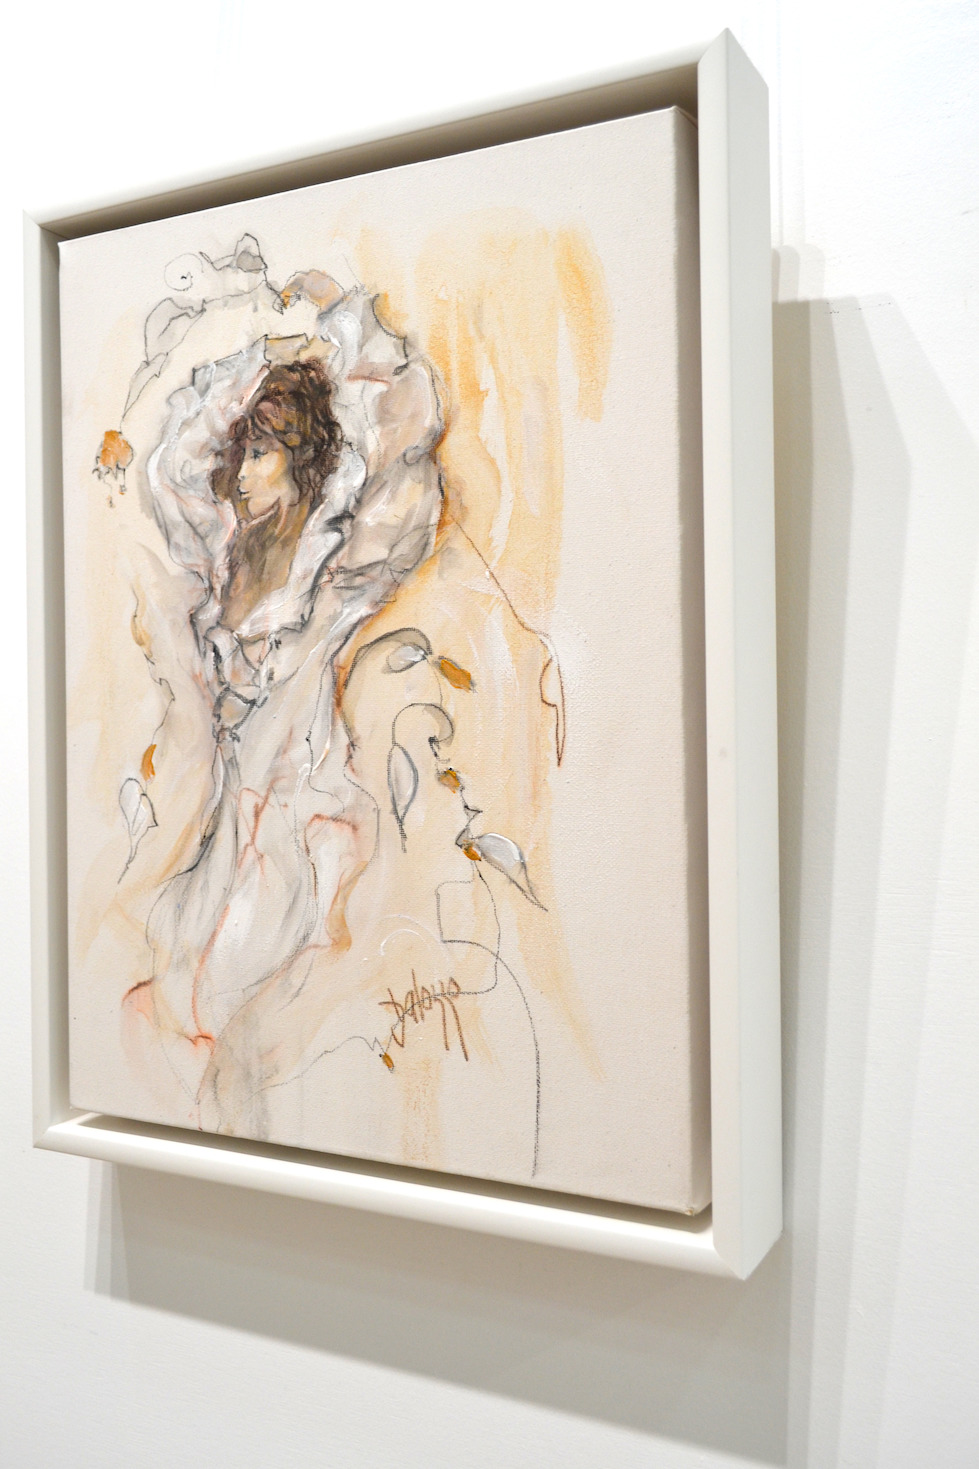 Framed Side View Of Nude Painting "Free Spirited" By Lucette Dalozzo